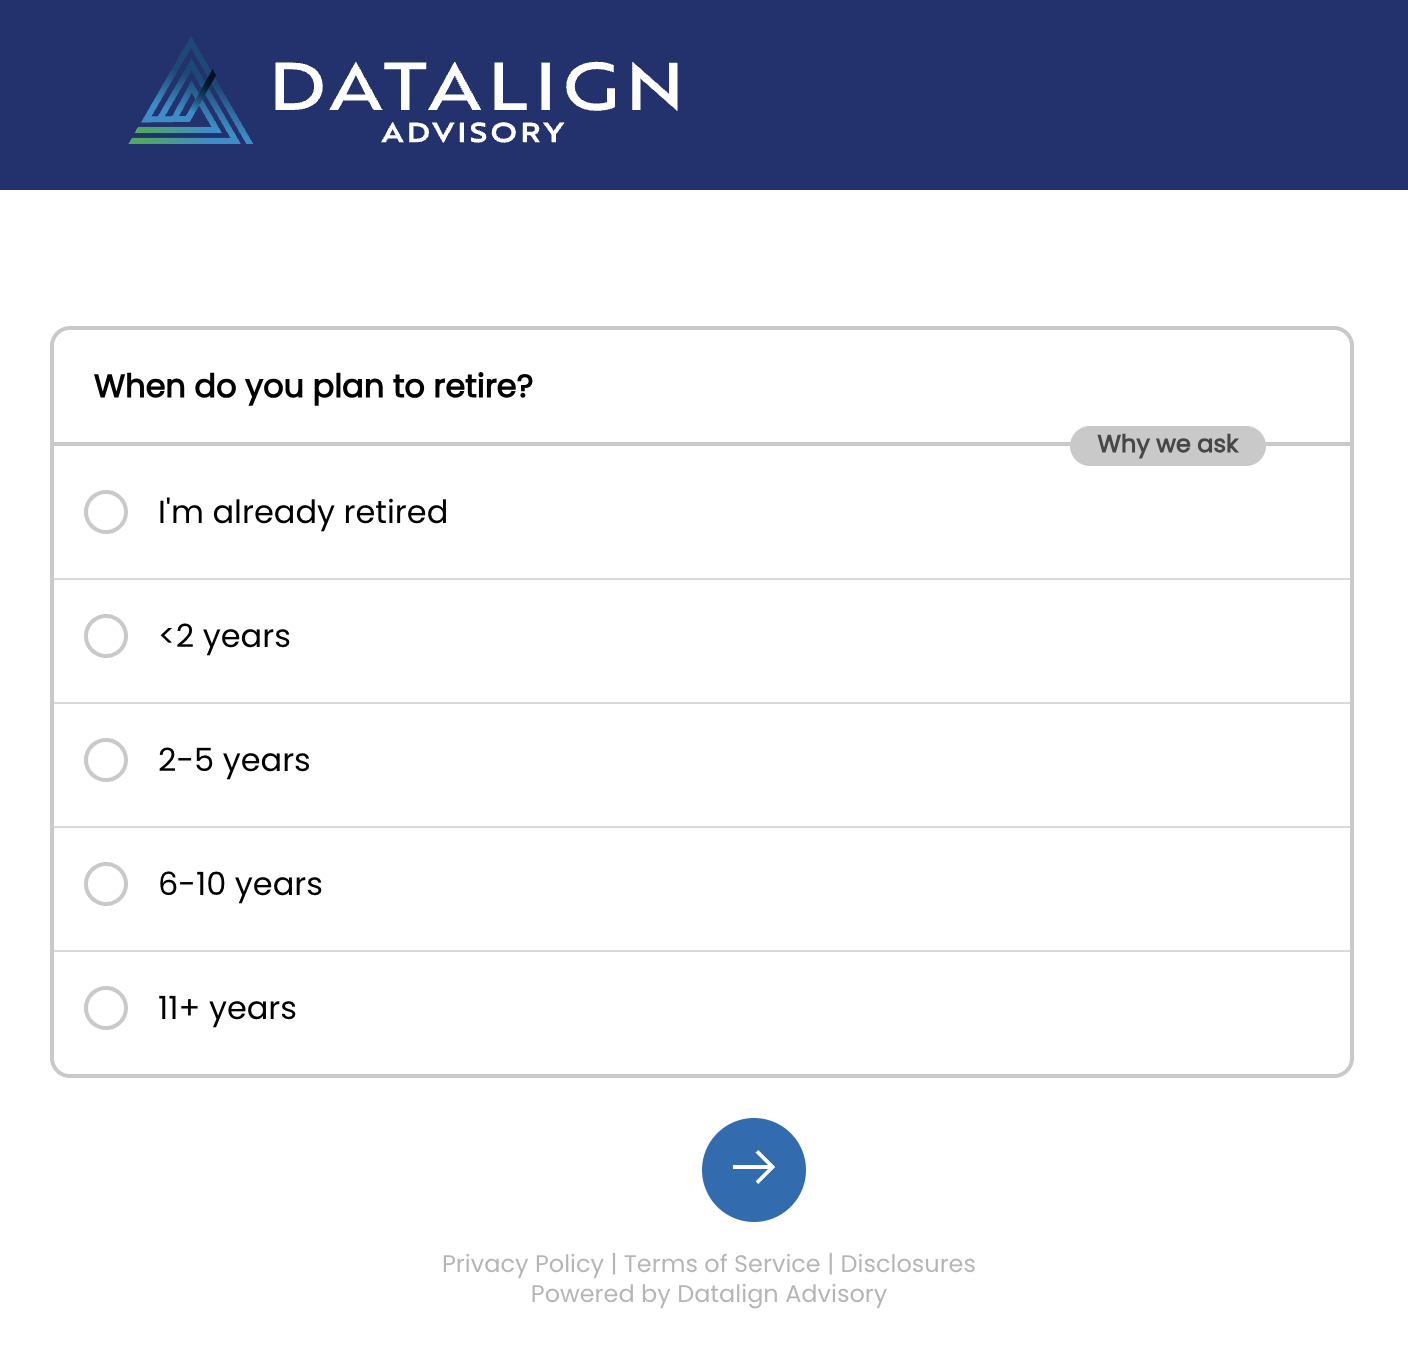 Datalign questionnaire asking readers when they plan to retire alongside multiple choice options